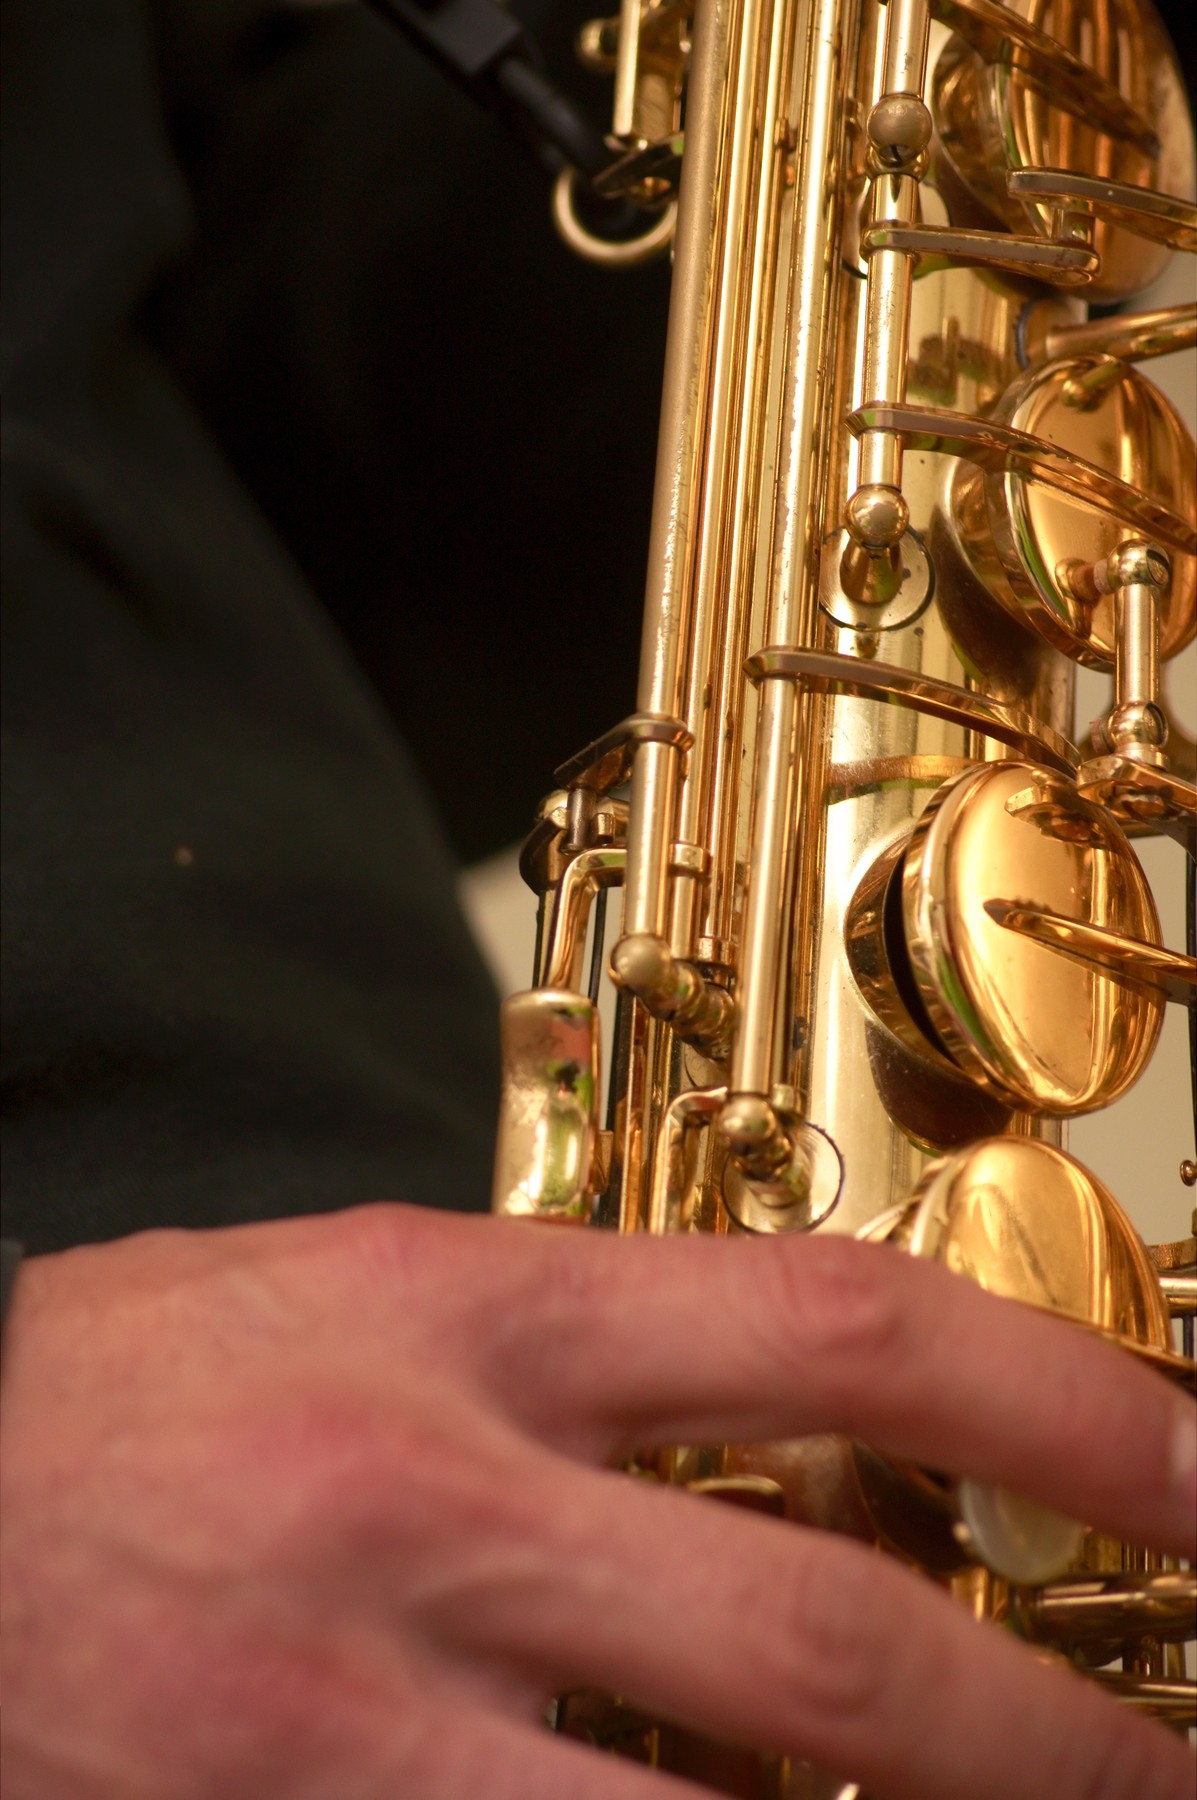 Close up of hands on a Saxophone | zigazou76  -  Foter  -  CC BY 2.0